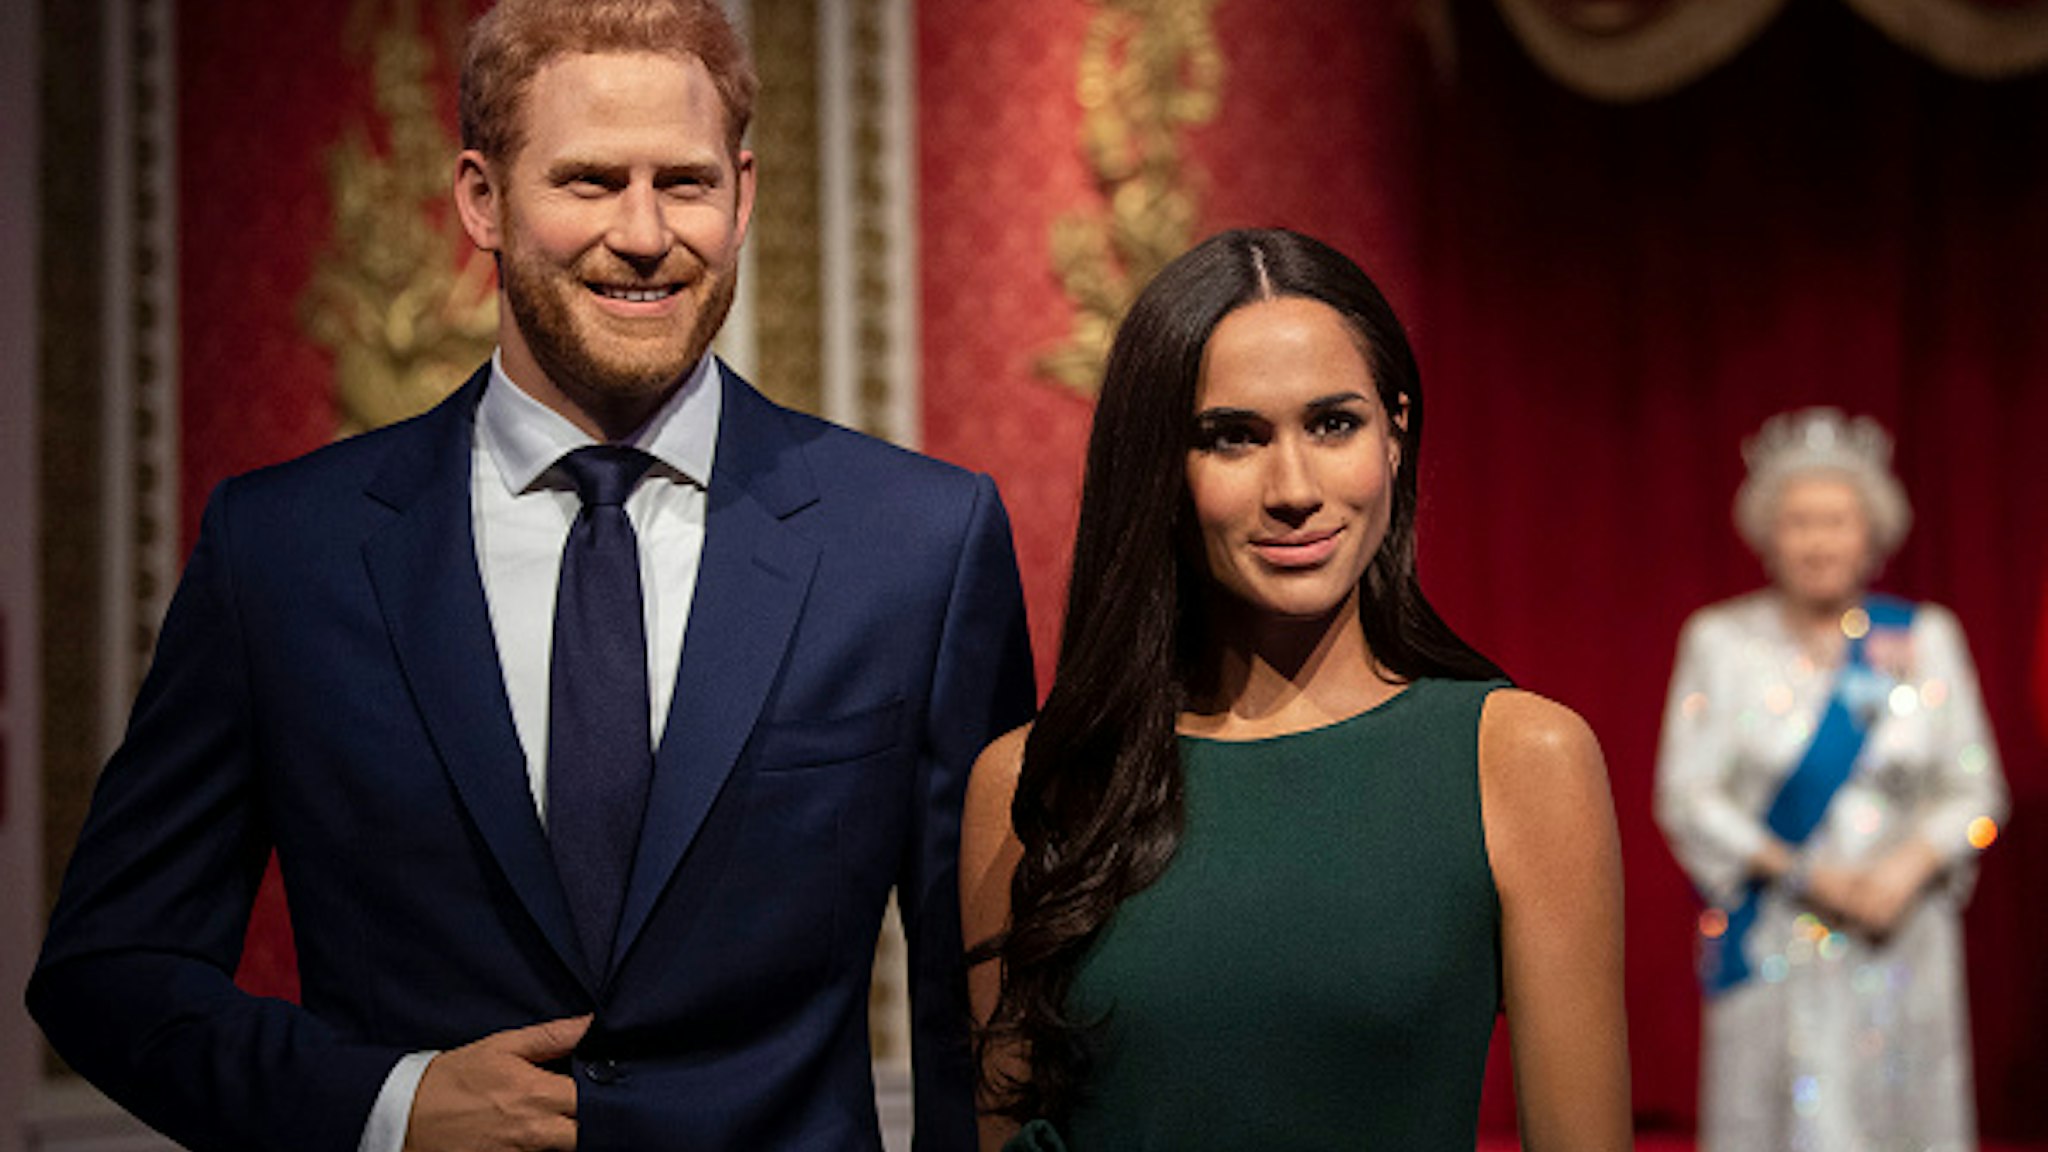 Madame Tussauds London moves its figures of the Duke and Duchess of Sussex from its Royal Family set to elsewhere in the attraction, in the wake of the announcement that they will take a step back as "senior members" of the royal family, dividing their time between the UK and North America.